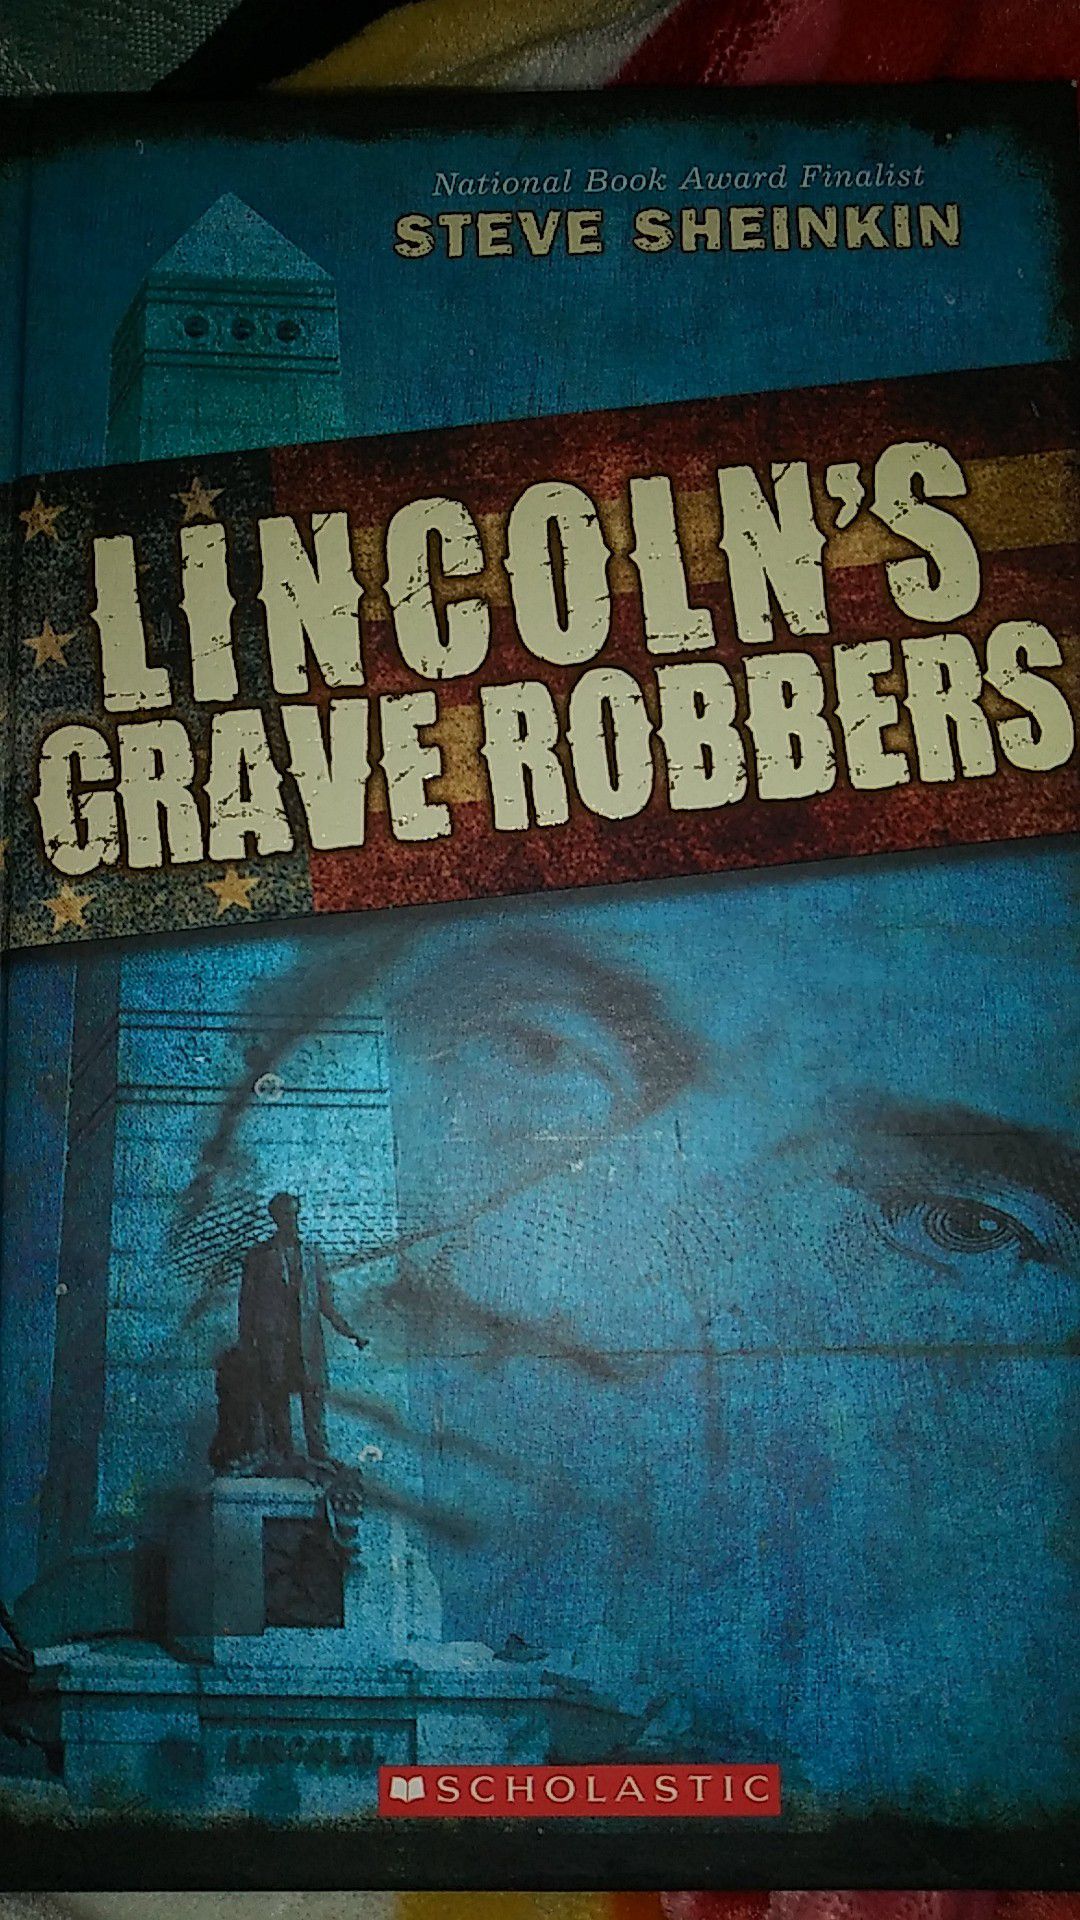 Lincolns grave robbers